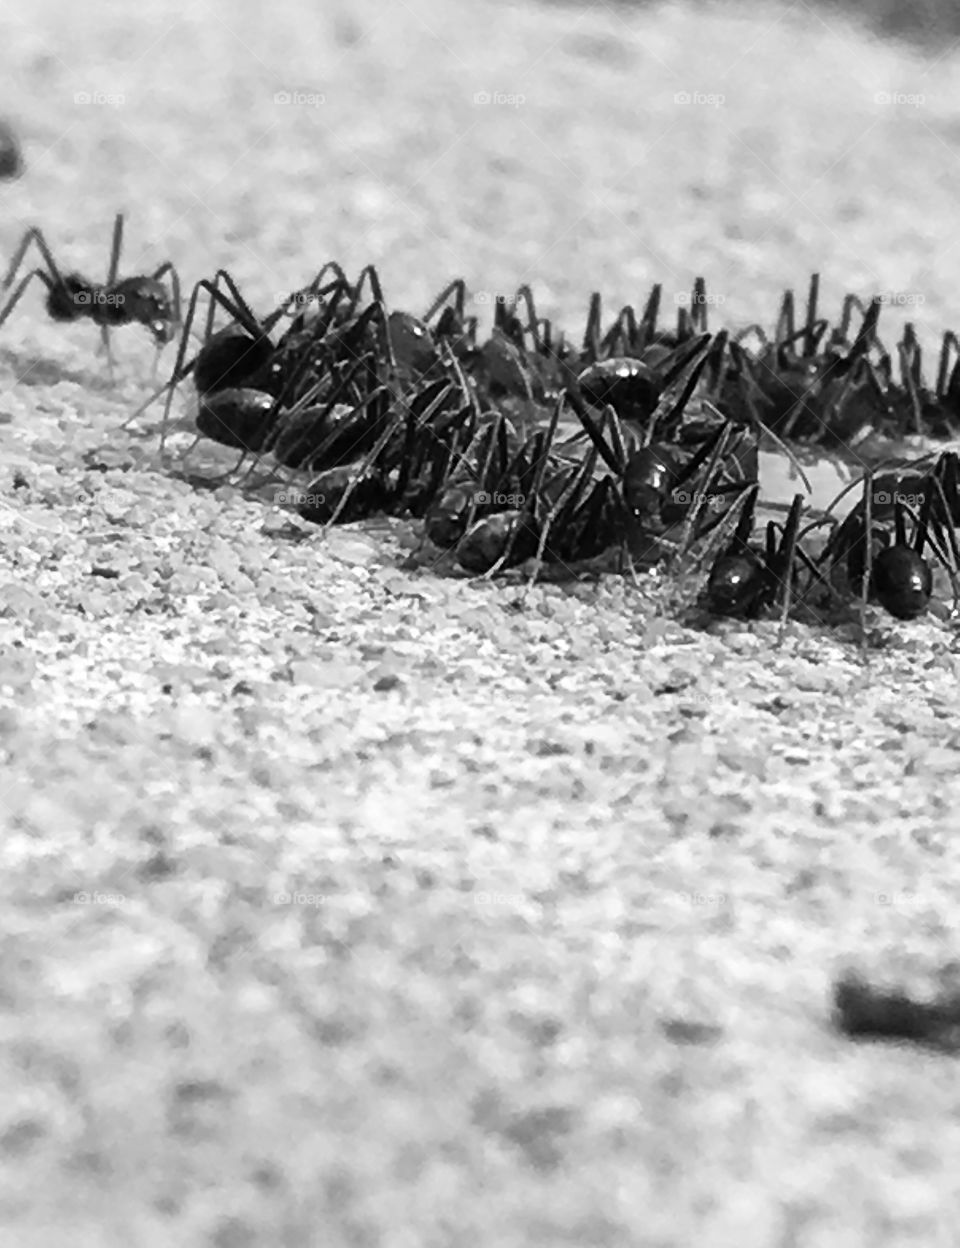 Worker ants congregating black and white image